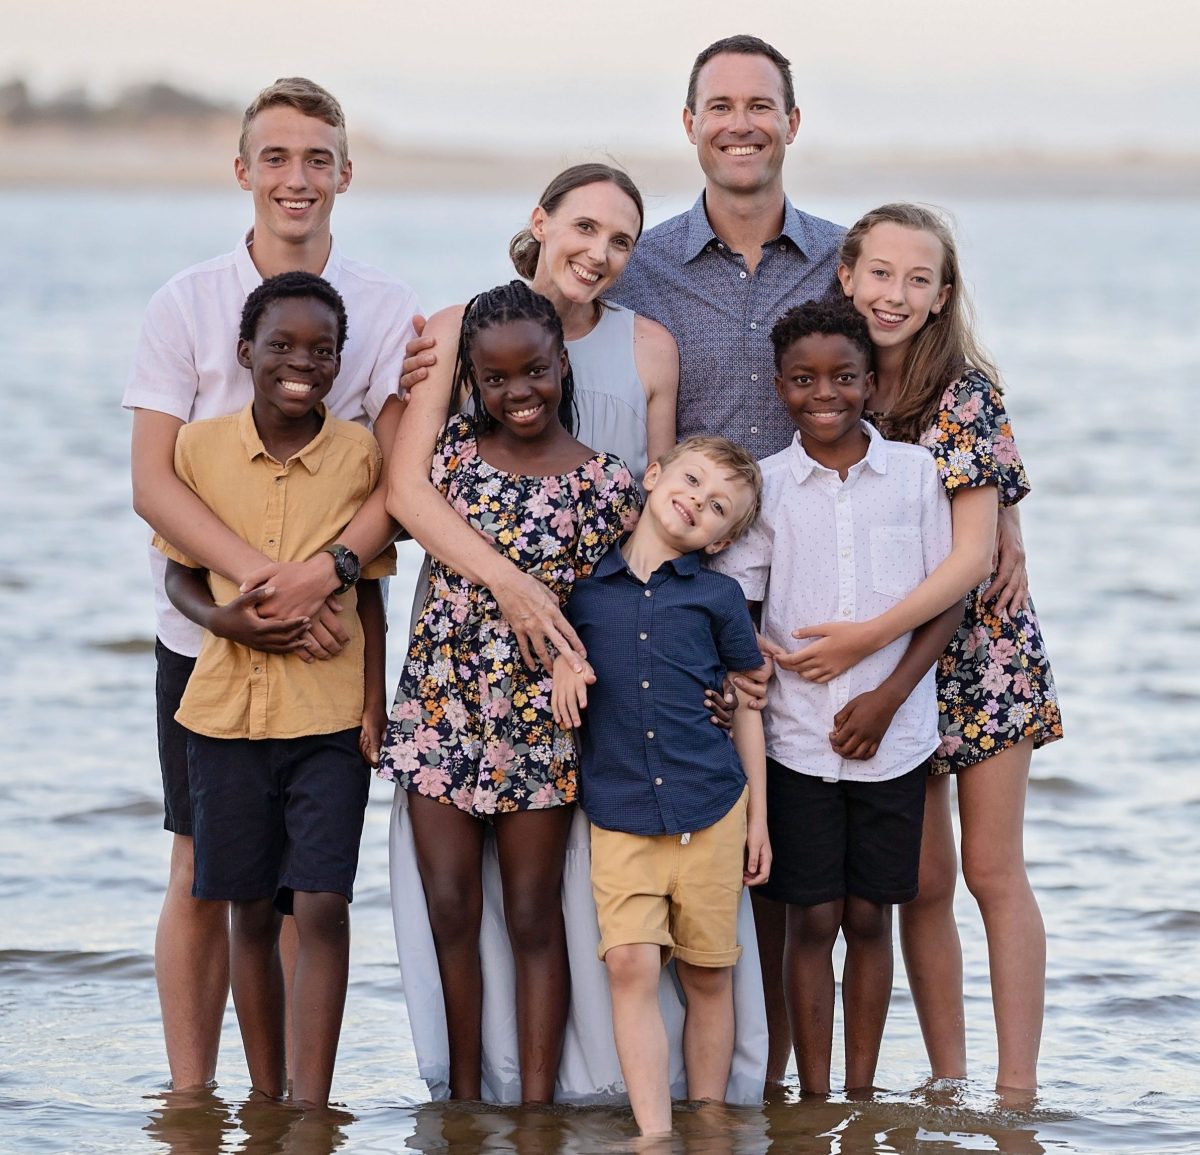 Anna and Mark Dombkins with their three biological children and three adopted children stand on a beach